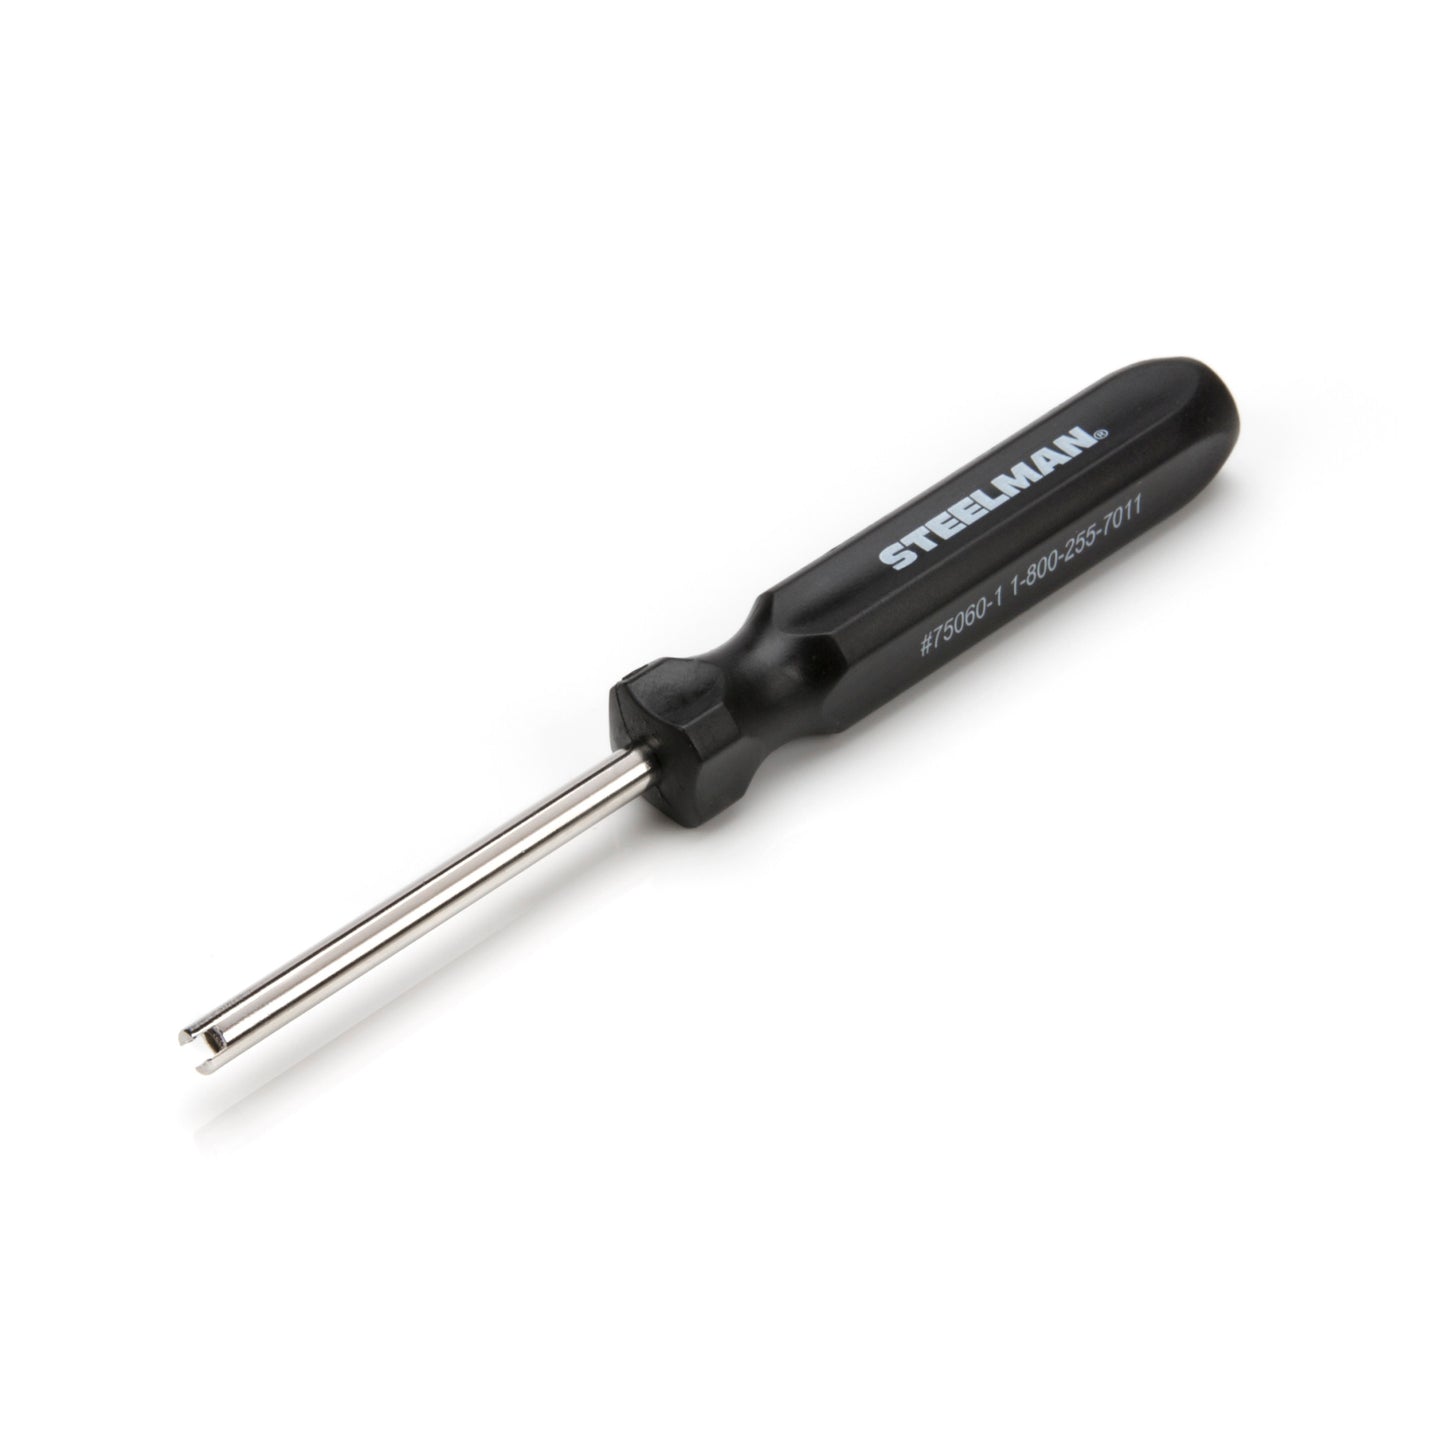 Valve Core Remover with Screwdriver-Style Handle